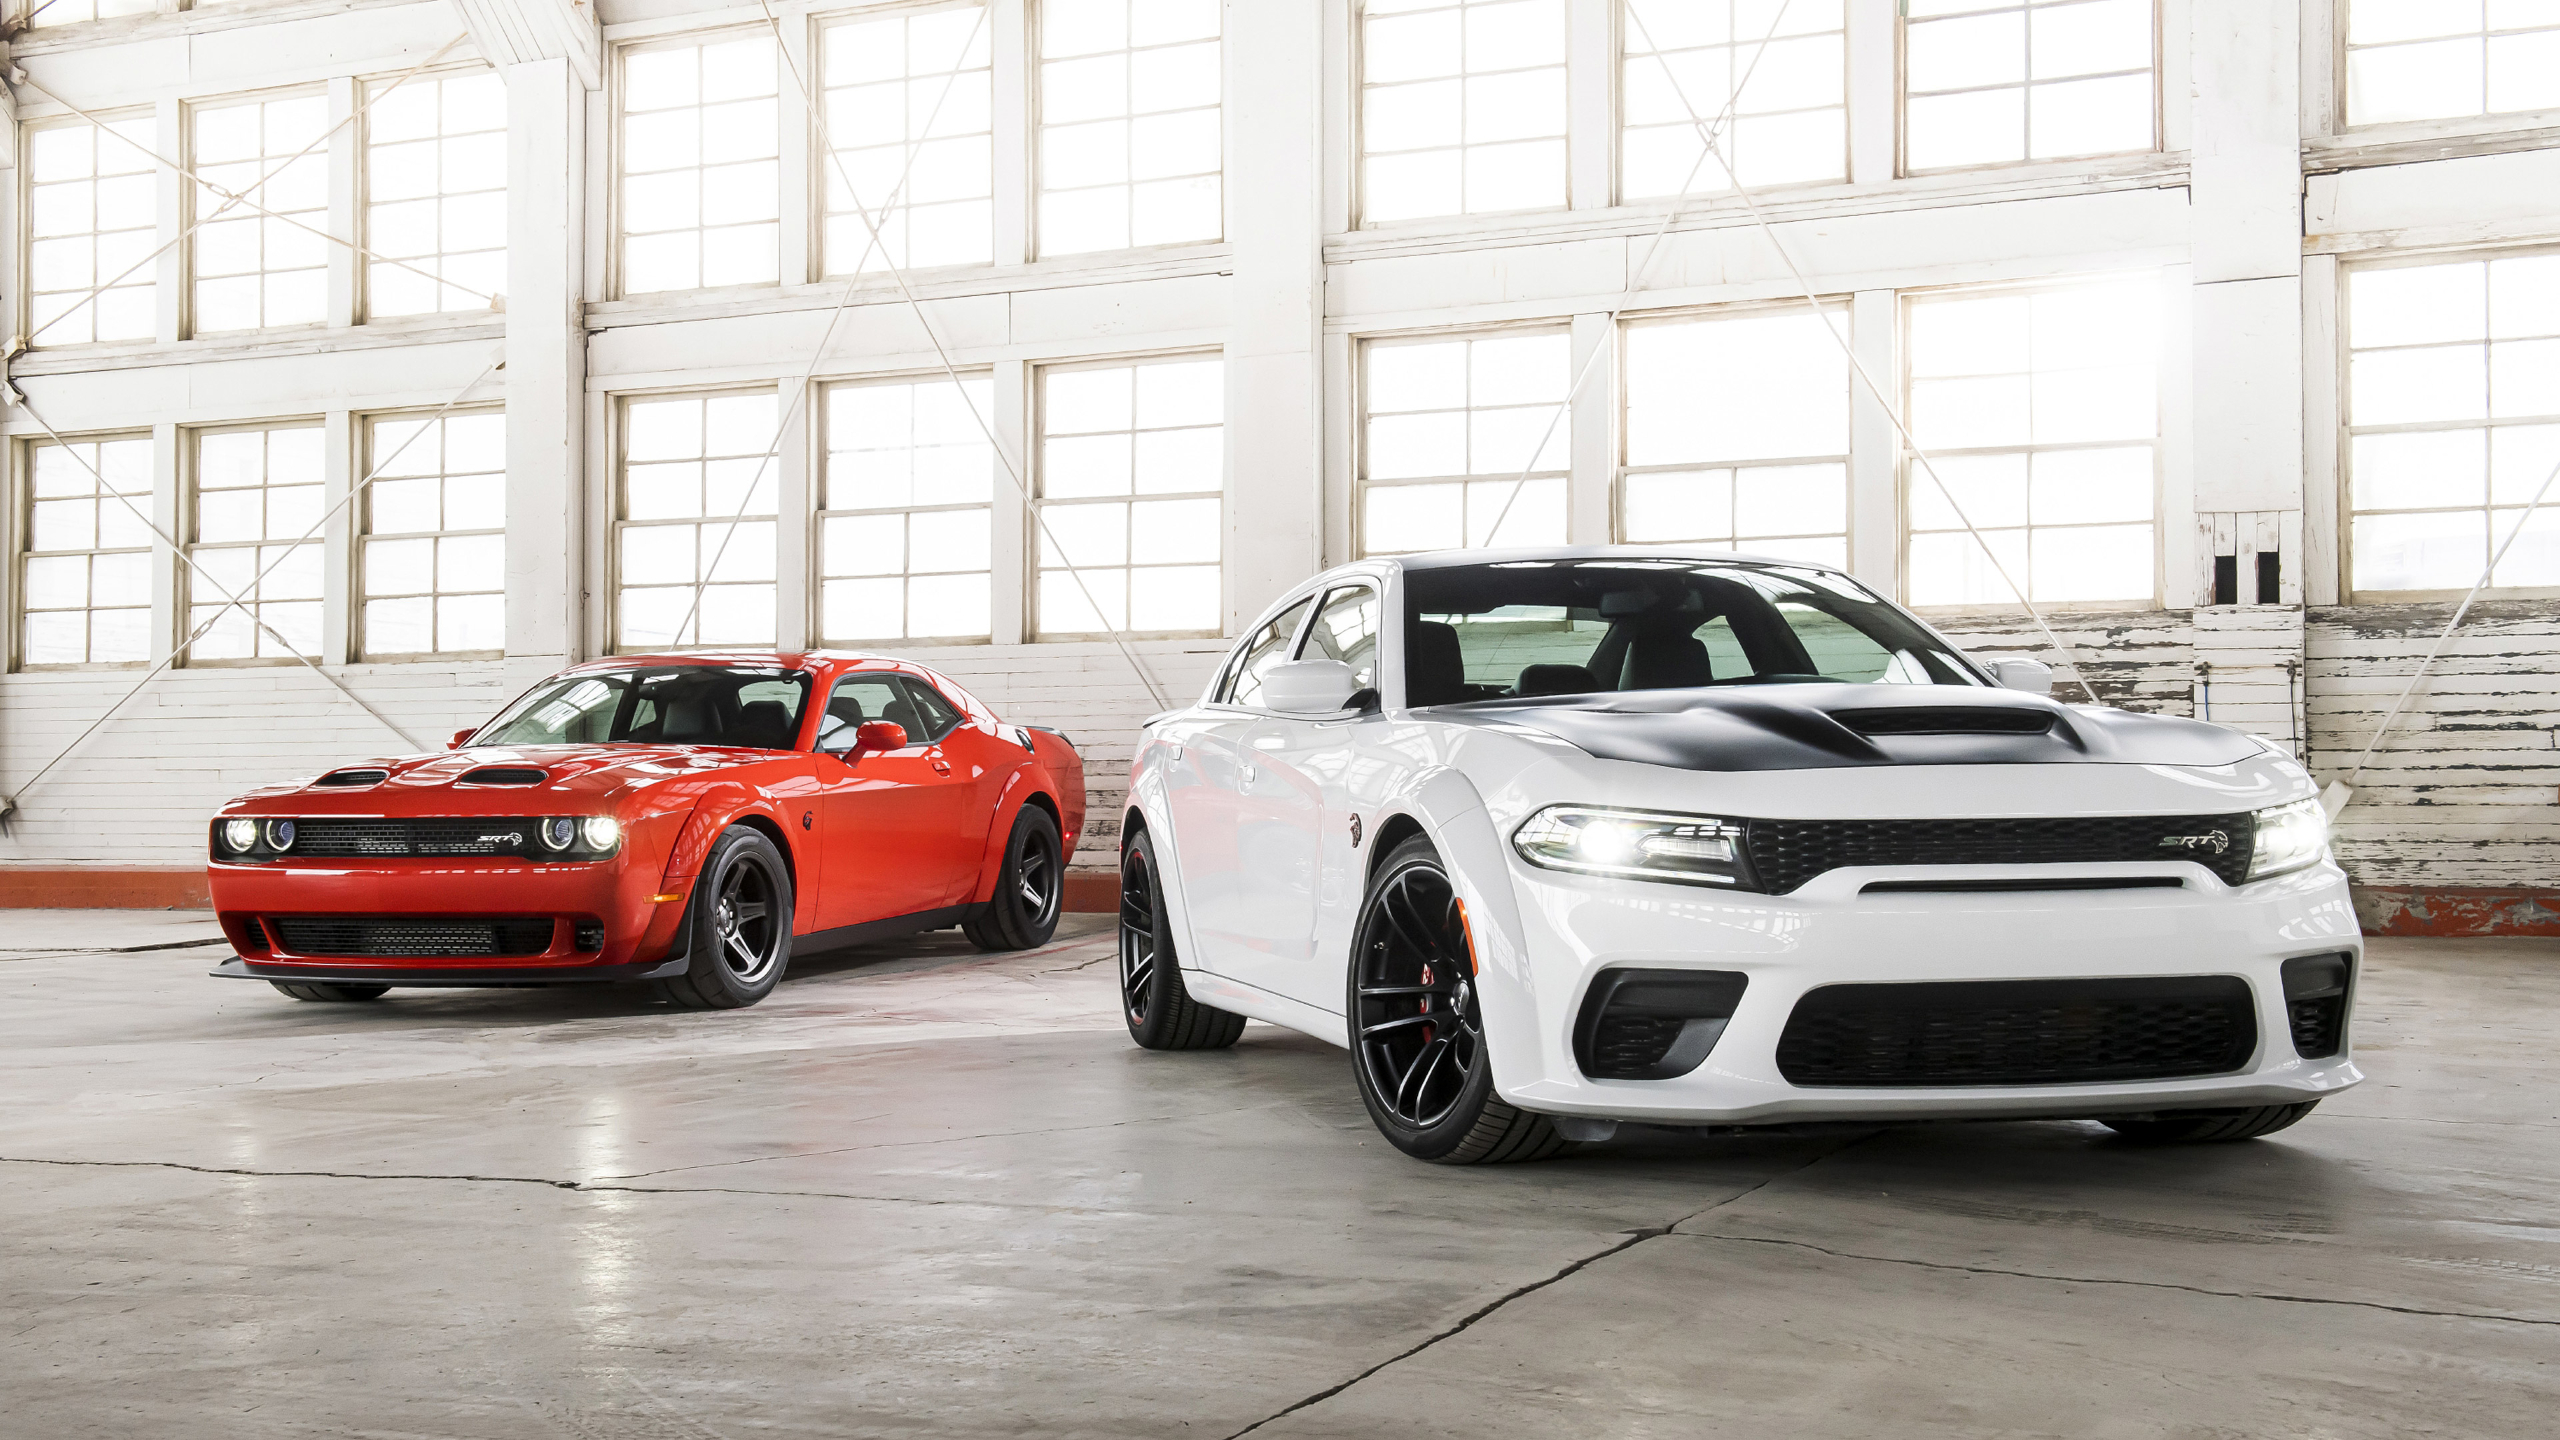 Dodge Charger Hellcat Car Muscle Cars Vehicle Hangar White Cars Dodge Challenger SRT Red Cars Hellca 2560x1440